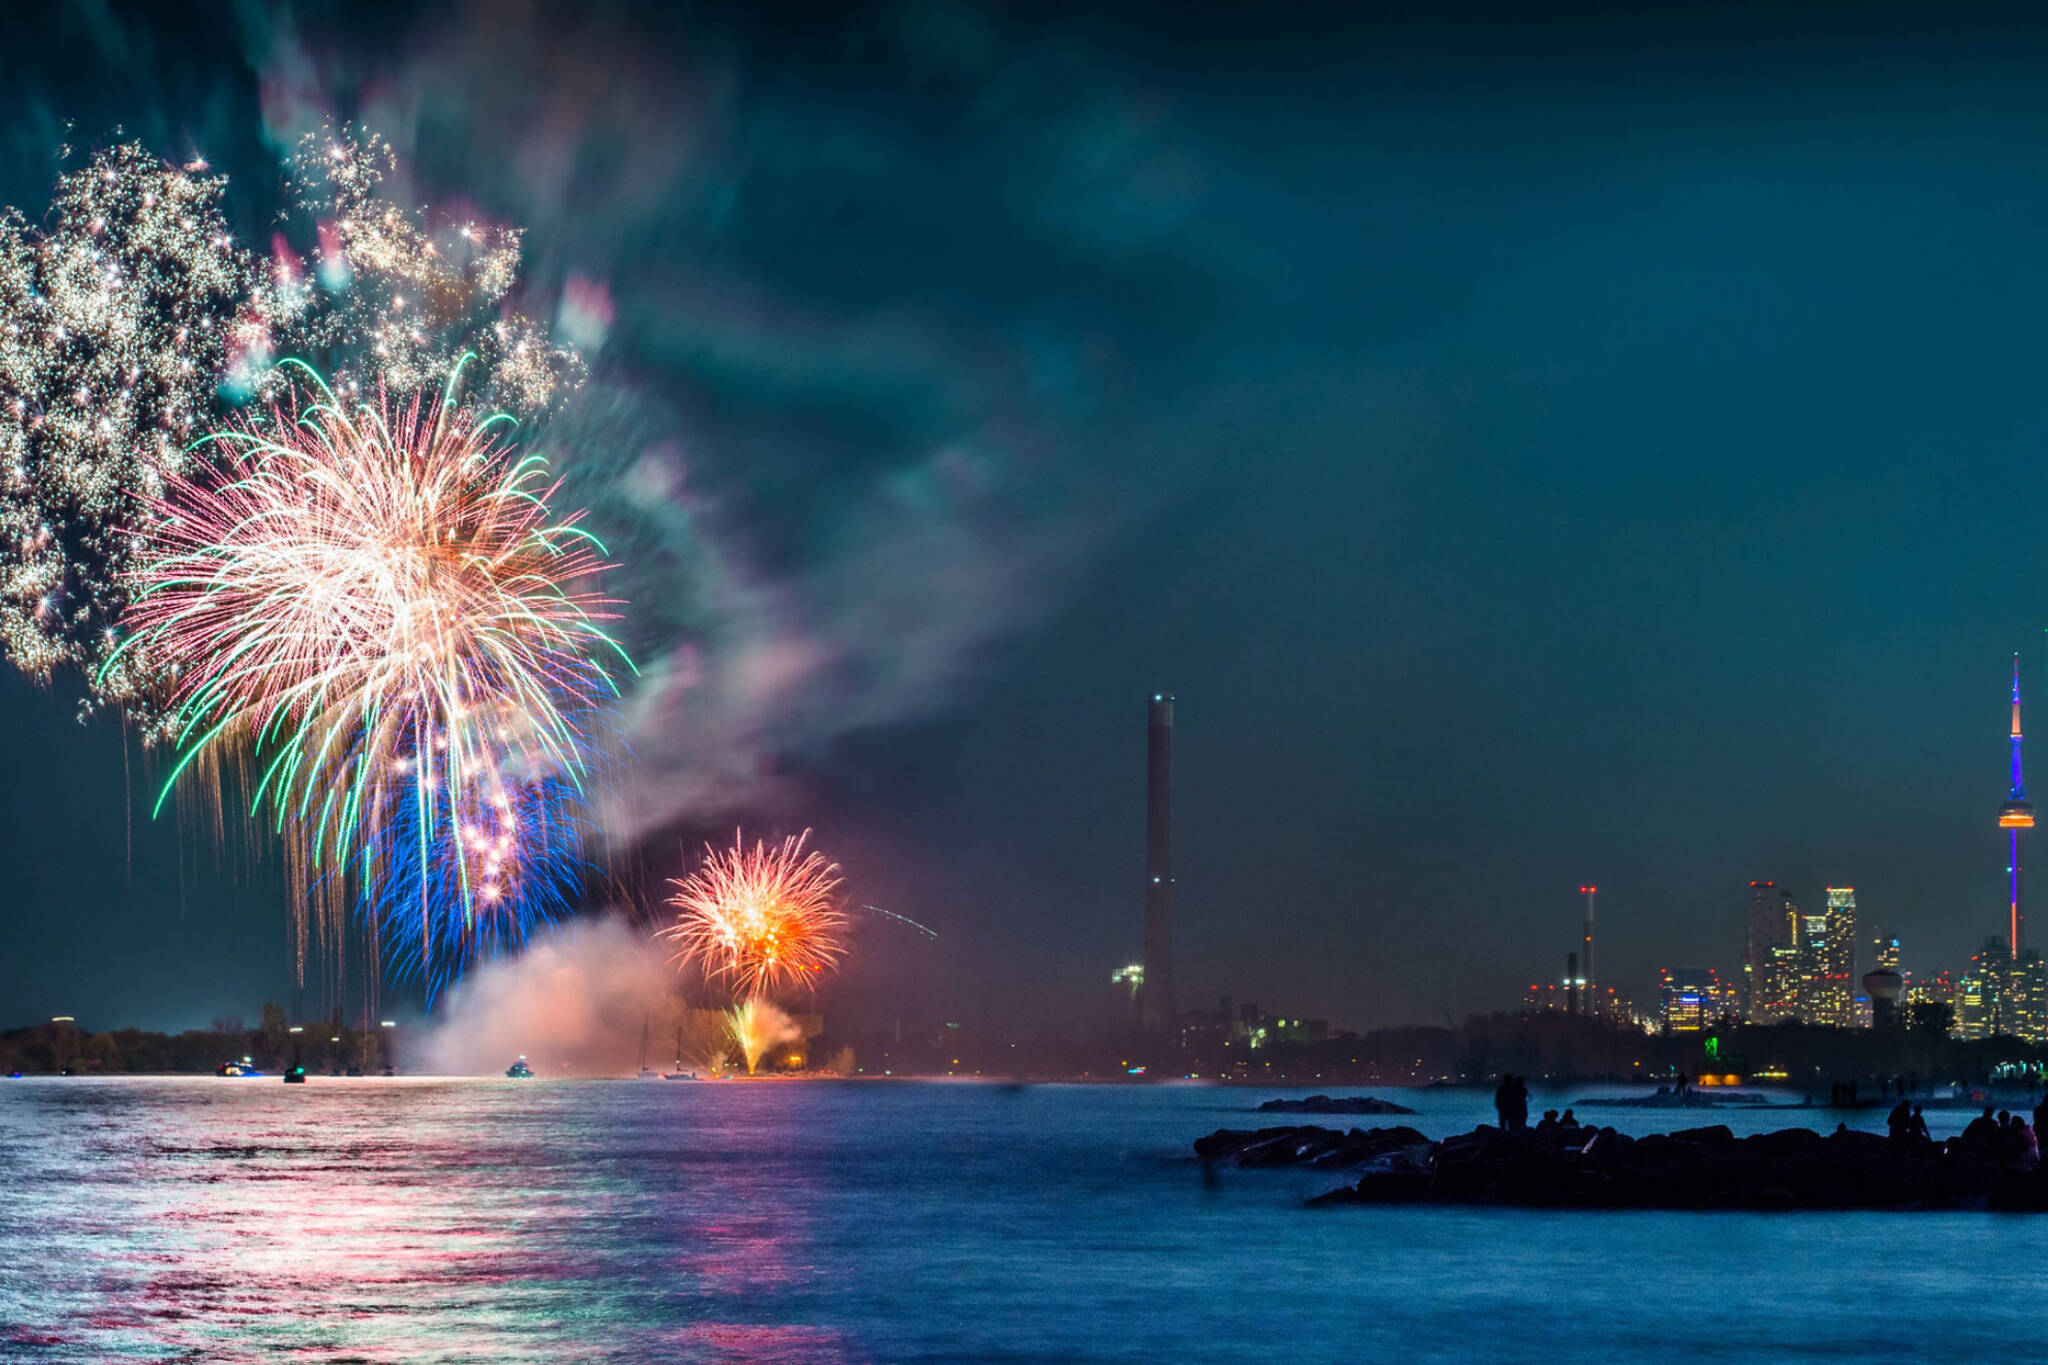 Fireworks will be allowed on Victoria Day 2021 in Toronto and here are